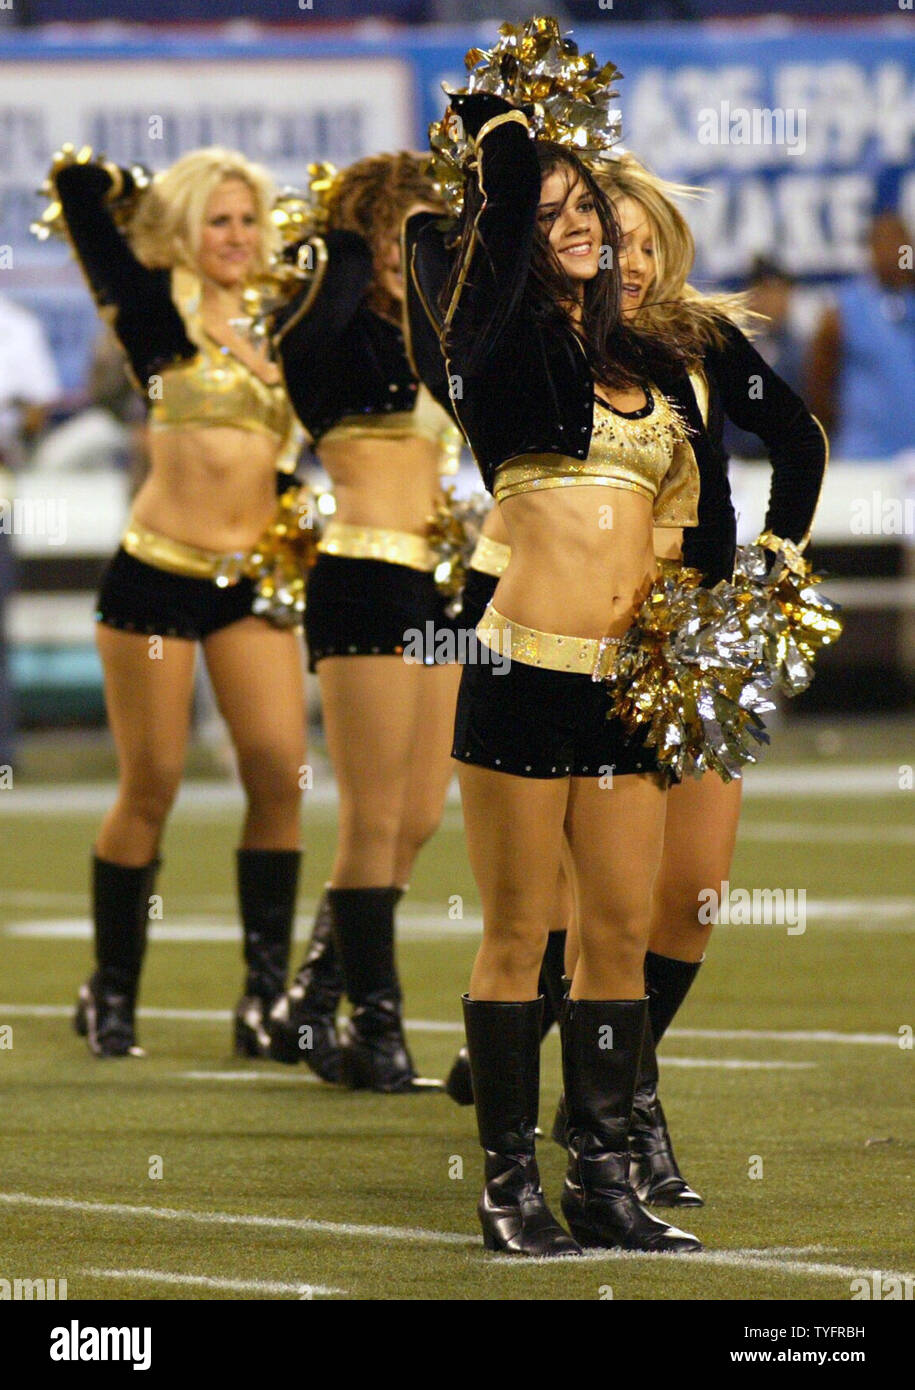 New Orleans Saints cheerleaders cheer for their team. The New York Giants hosted the New Orleans Saints in week 2 for Monday Night Football at Giants Stadium in East Rutherford New Jersey on September 19, 2005.    (UPI Photo/John Angelillo) Stock Photo